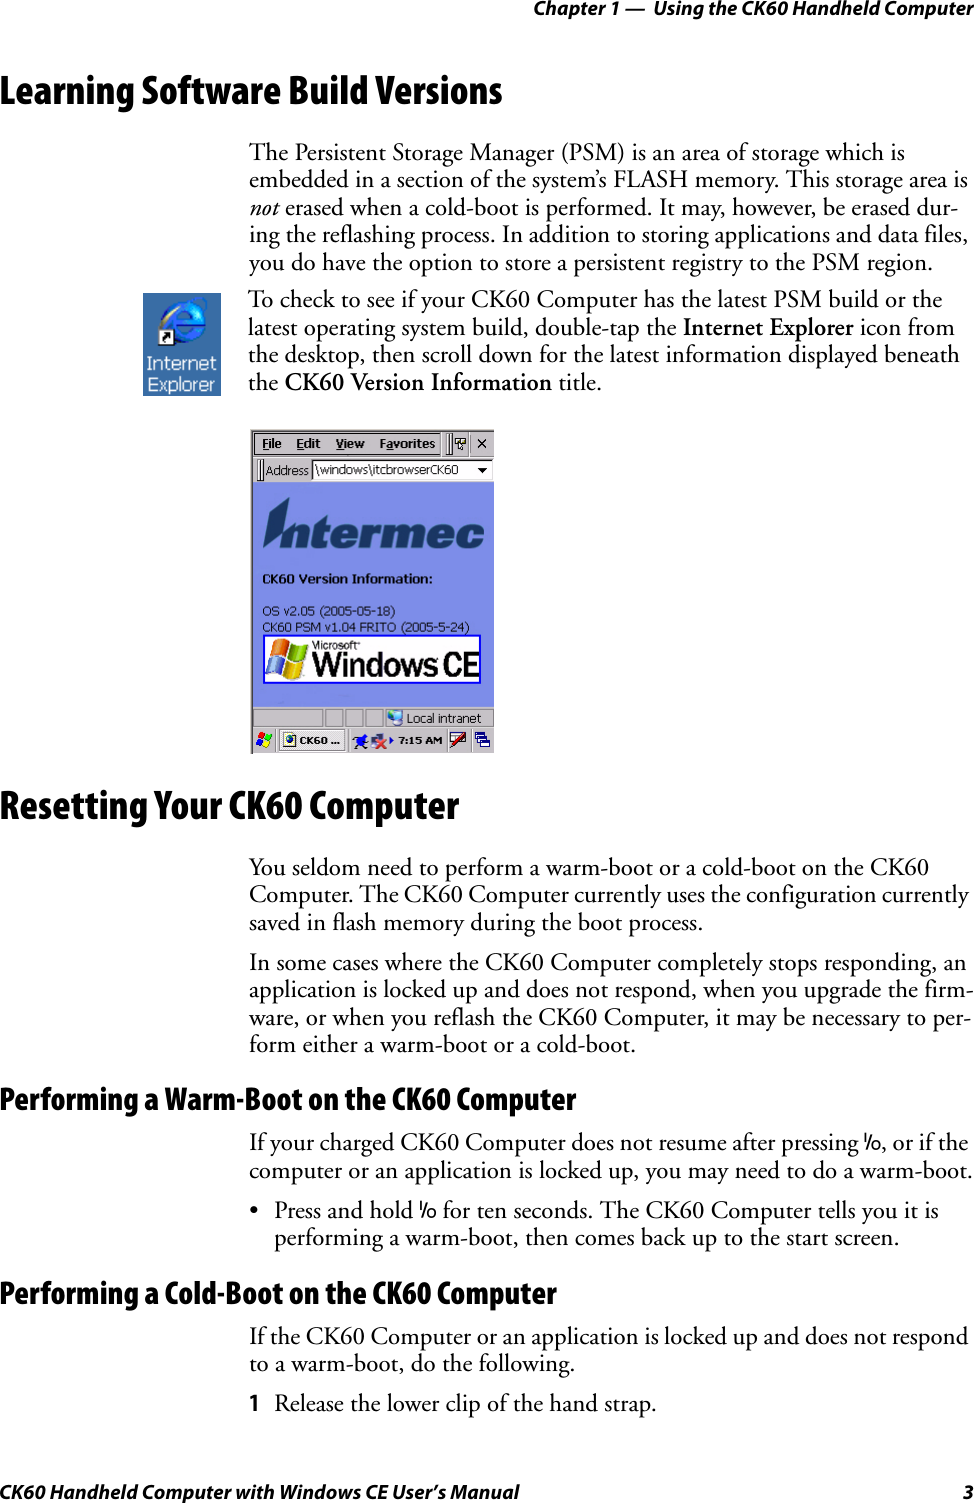 Chapter 1 —  Using the CK60 Handheld ComputerCK60 Handheld Computer with Windows CE User’s Manual 3Learning Software Build VersionsThe Persistent Storage Manager (PSM) is an area of storage which is embedded in a section of the system’s FLASH memory. This storage area is not erased when a cold-boot is performed. It may, however, be erased dur-ing the reflashing process. In addition to storing applications and data files, you do have the option to store a persistent registry to the PSM region.Resetting Your CK60 ComputerYou seldom need to perform a warm-boot or a cold-boot on the CK60 Computer. The CK60 Computer currently uses the configuration currently saved in flash memory during the boot process.In some cases where the CK60 Computer completely stops responding, an application is locked up and does not respond, when you upgrade the firm-ware, or when you reflash the CK60 Computer, it may be necessary to per-form either a warm-boot or a cold-boot.Performing a Warm-Boot on the CK60 ComputerIf your charged CK60 Computer does not resume after pressing I, or if the computer or an application is locked up, you may need to do a warm-boot.•Press and hold I for ten seconds. The CK60 Computer tells you it is performing a warm-boot, then comes back up to the start screen.Performing a Cold-Boot on the CK60 ComputerIf the CK60 Computer or an application is locked up and does not respond to a warm-boot, do the following.1Release the lower clip of the hand strap.To check to see if your CK60 Computer has the latest PSM build or the latest operating system build, double-tap the Internet Explorer icon from the desktop, then scroll down for the latest information displayed beneath the CK60 Version Information title.